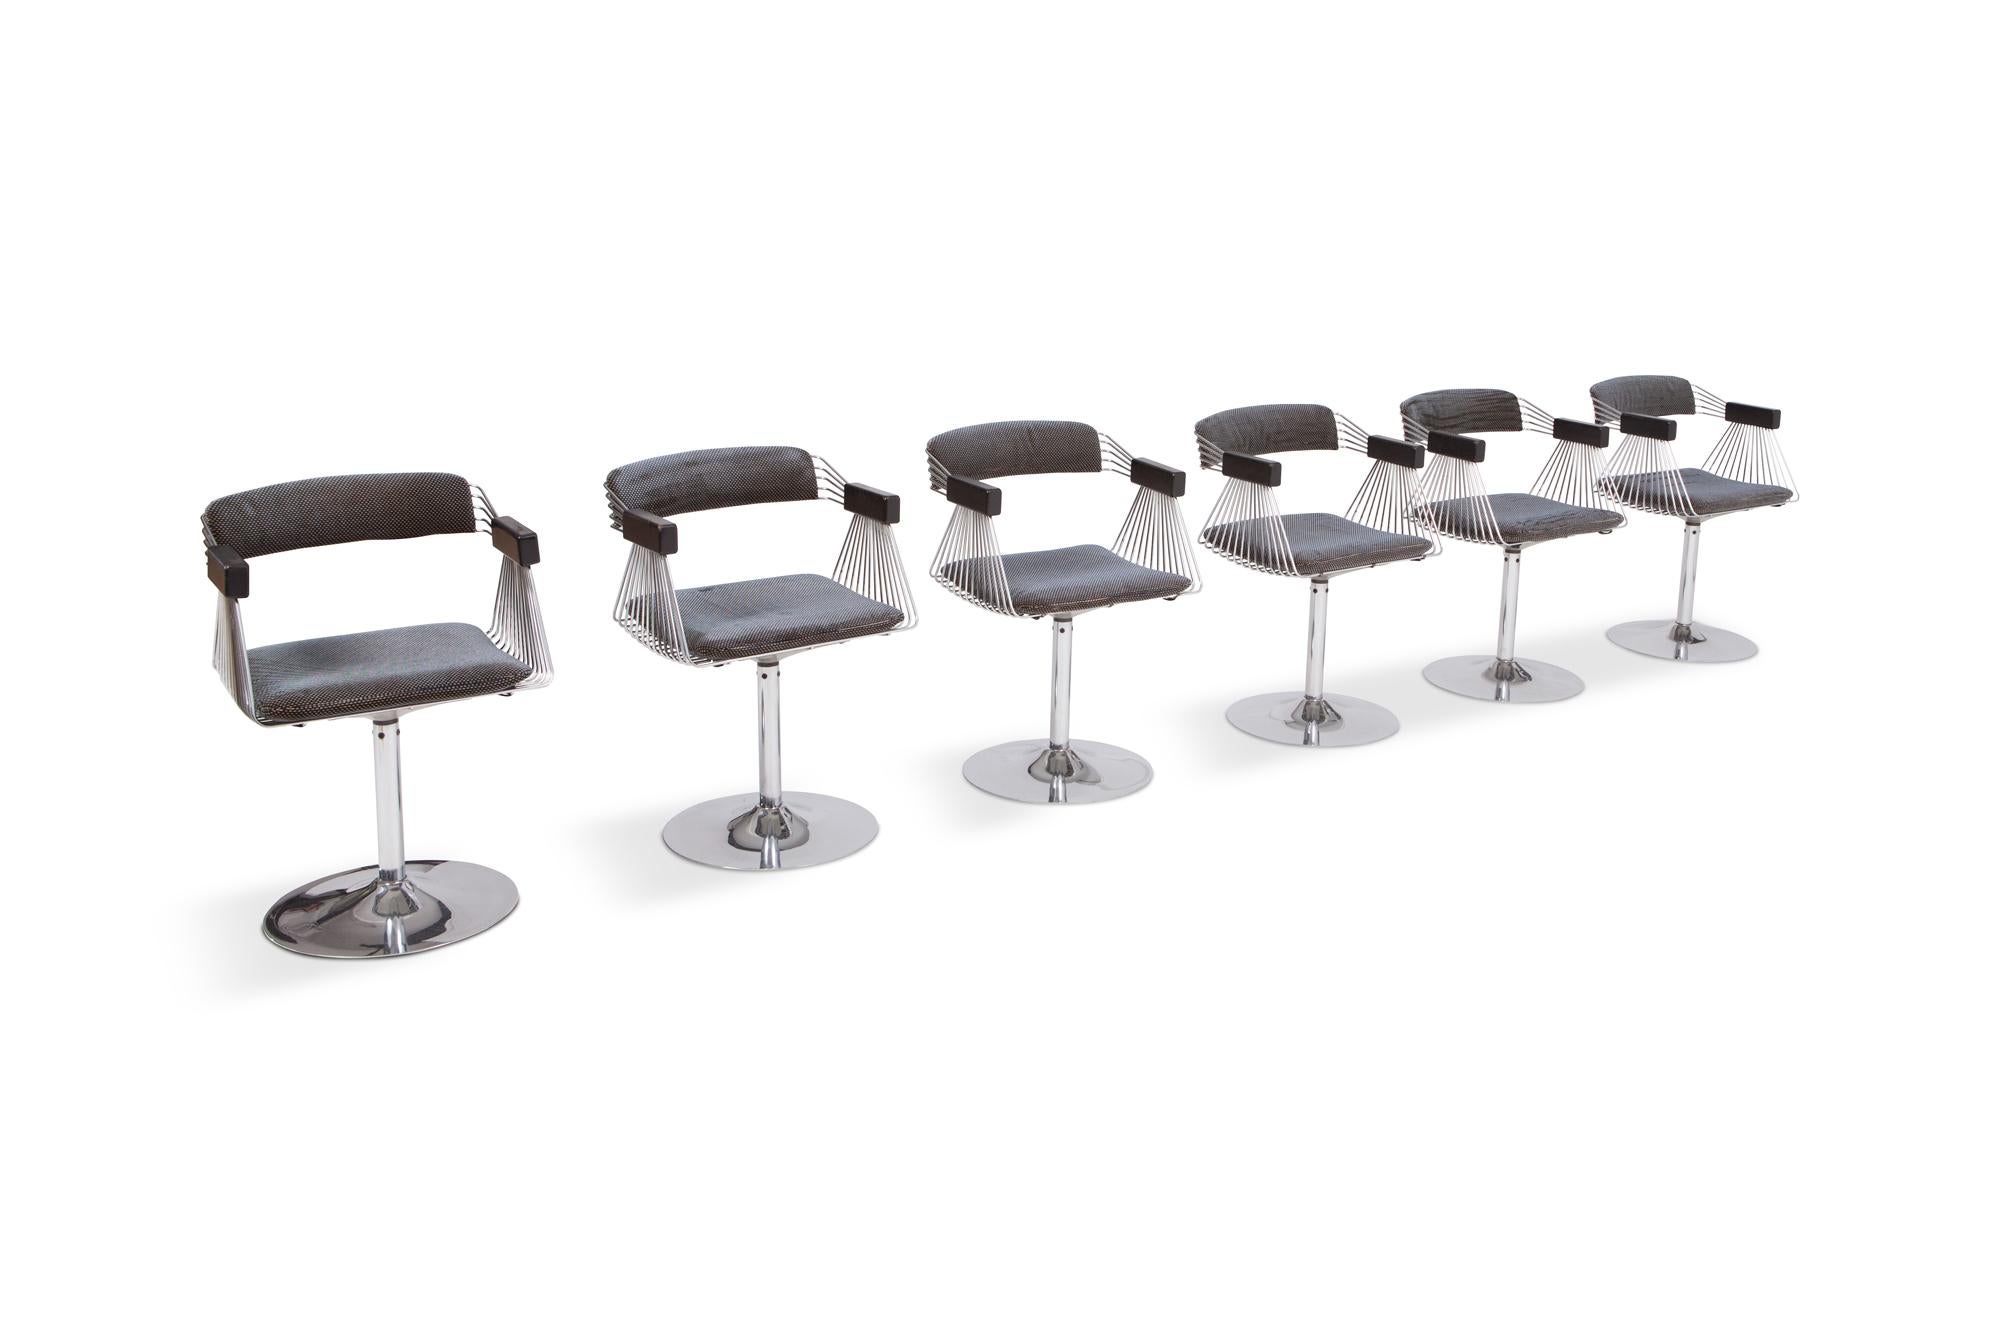 Space Age dining chairs by the Belgian designer Rudi Verelst, a true iconic design.

High seating comfort, beautiful chrome tulip feet, wooden armrests and original velvet upholstery. A very rare find. 

Note that this set holds the original